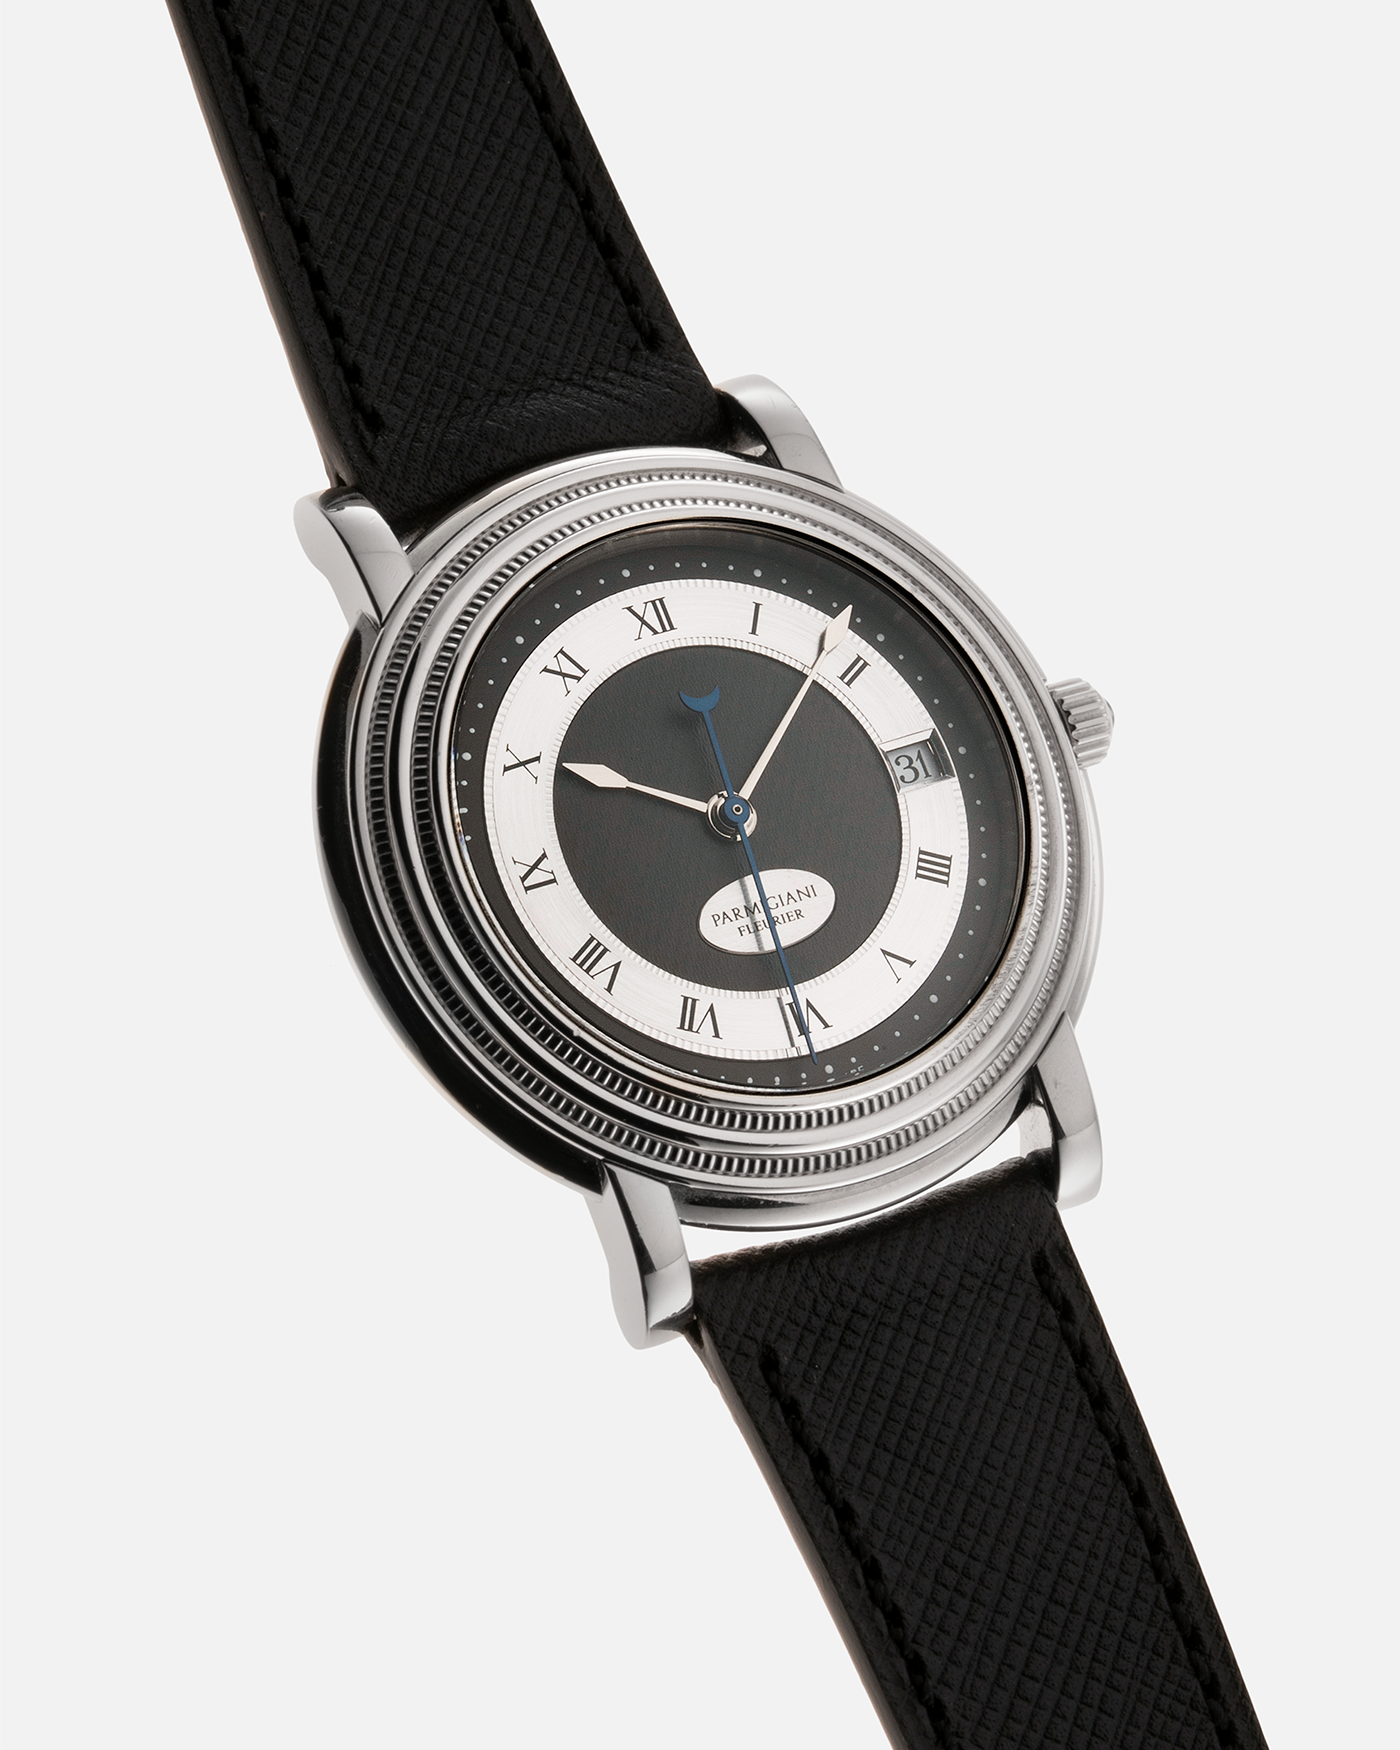 Brand: Parmigiani Fleurier Year: 1990’s Model: Toric Automatic Material: 18-carat White Gold Movement: PF Cal. 13301, Self-Winding Case Diameter: 40mm Strap: Molequin Black Textured Calf Leather Strap with 18-carat White Gold Signed Tang Buckle